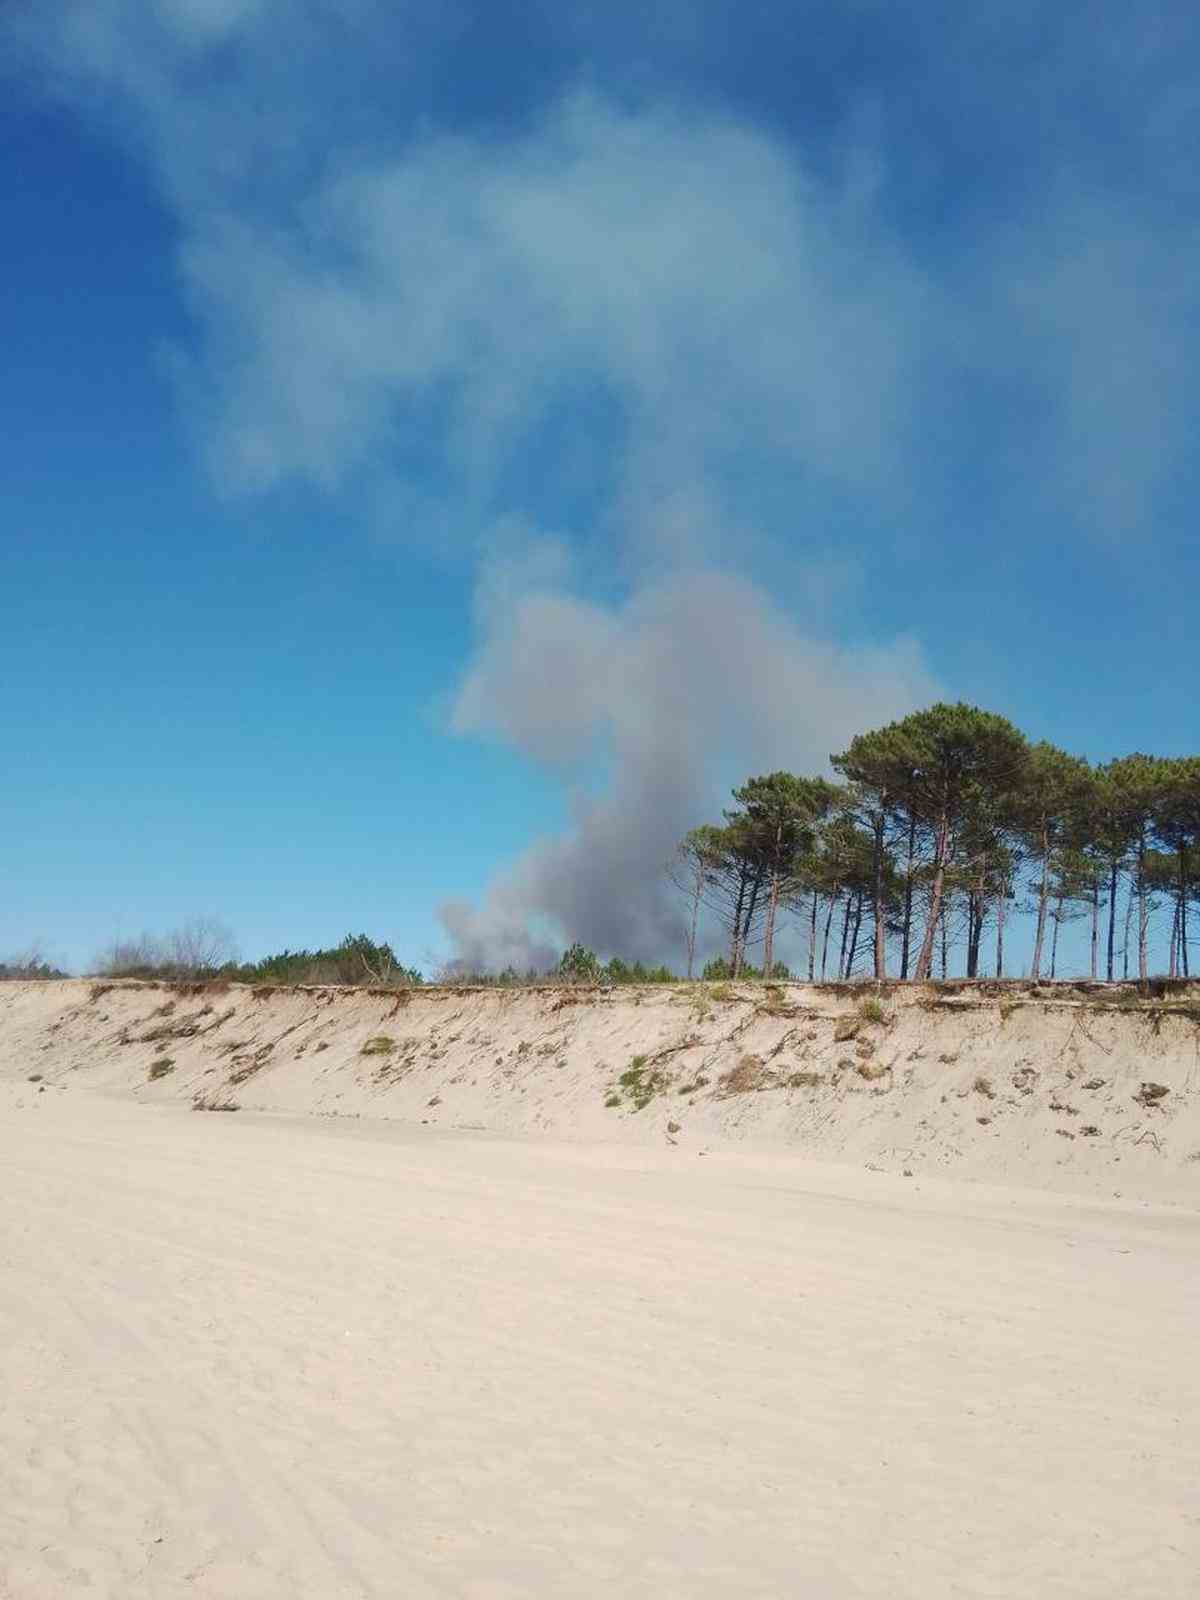 Smoke is also visible from ocean beaches.